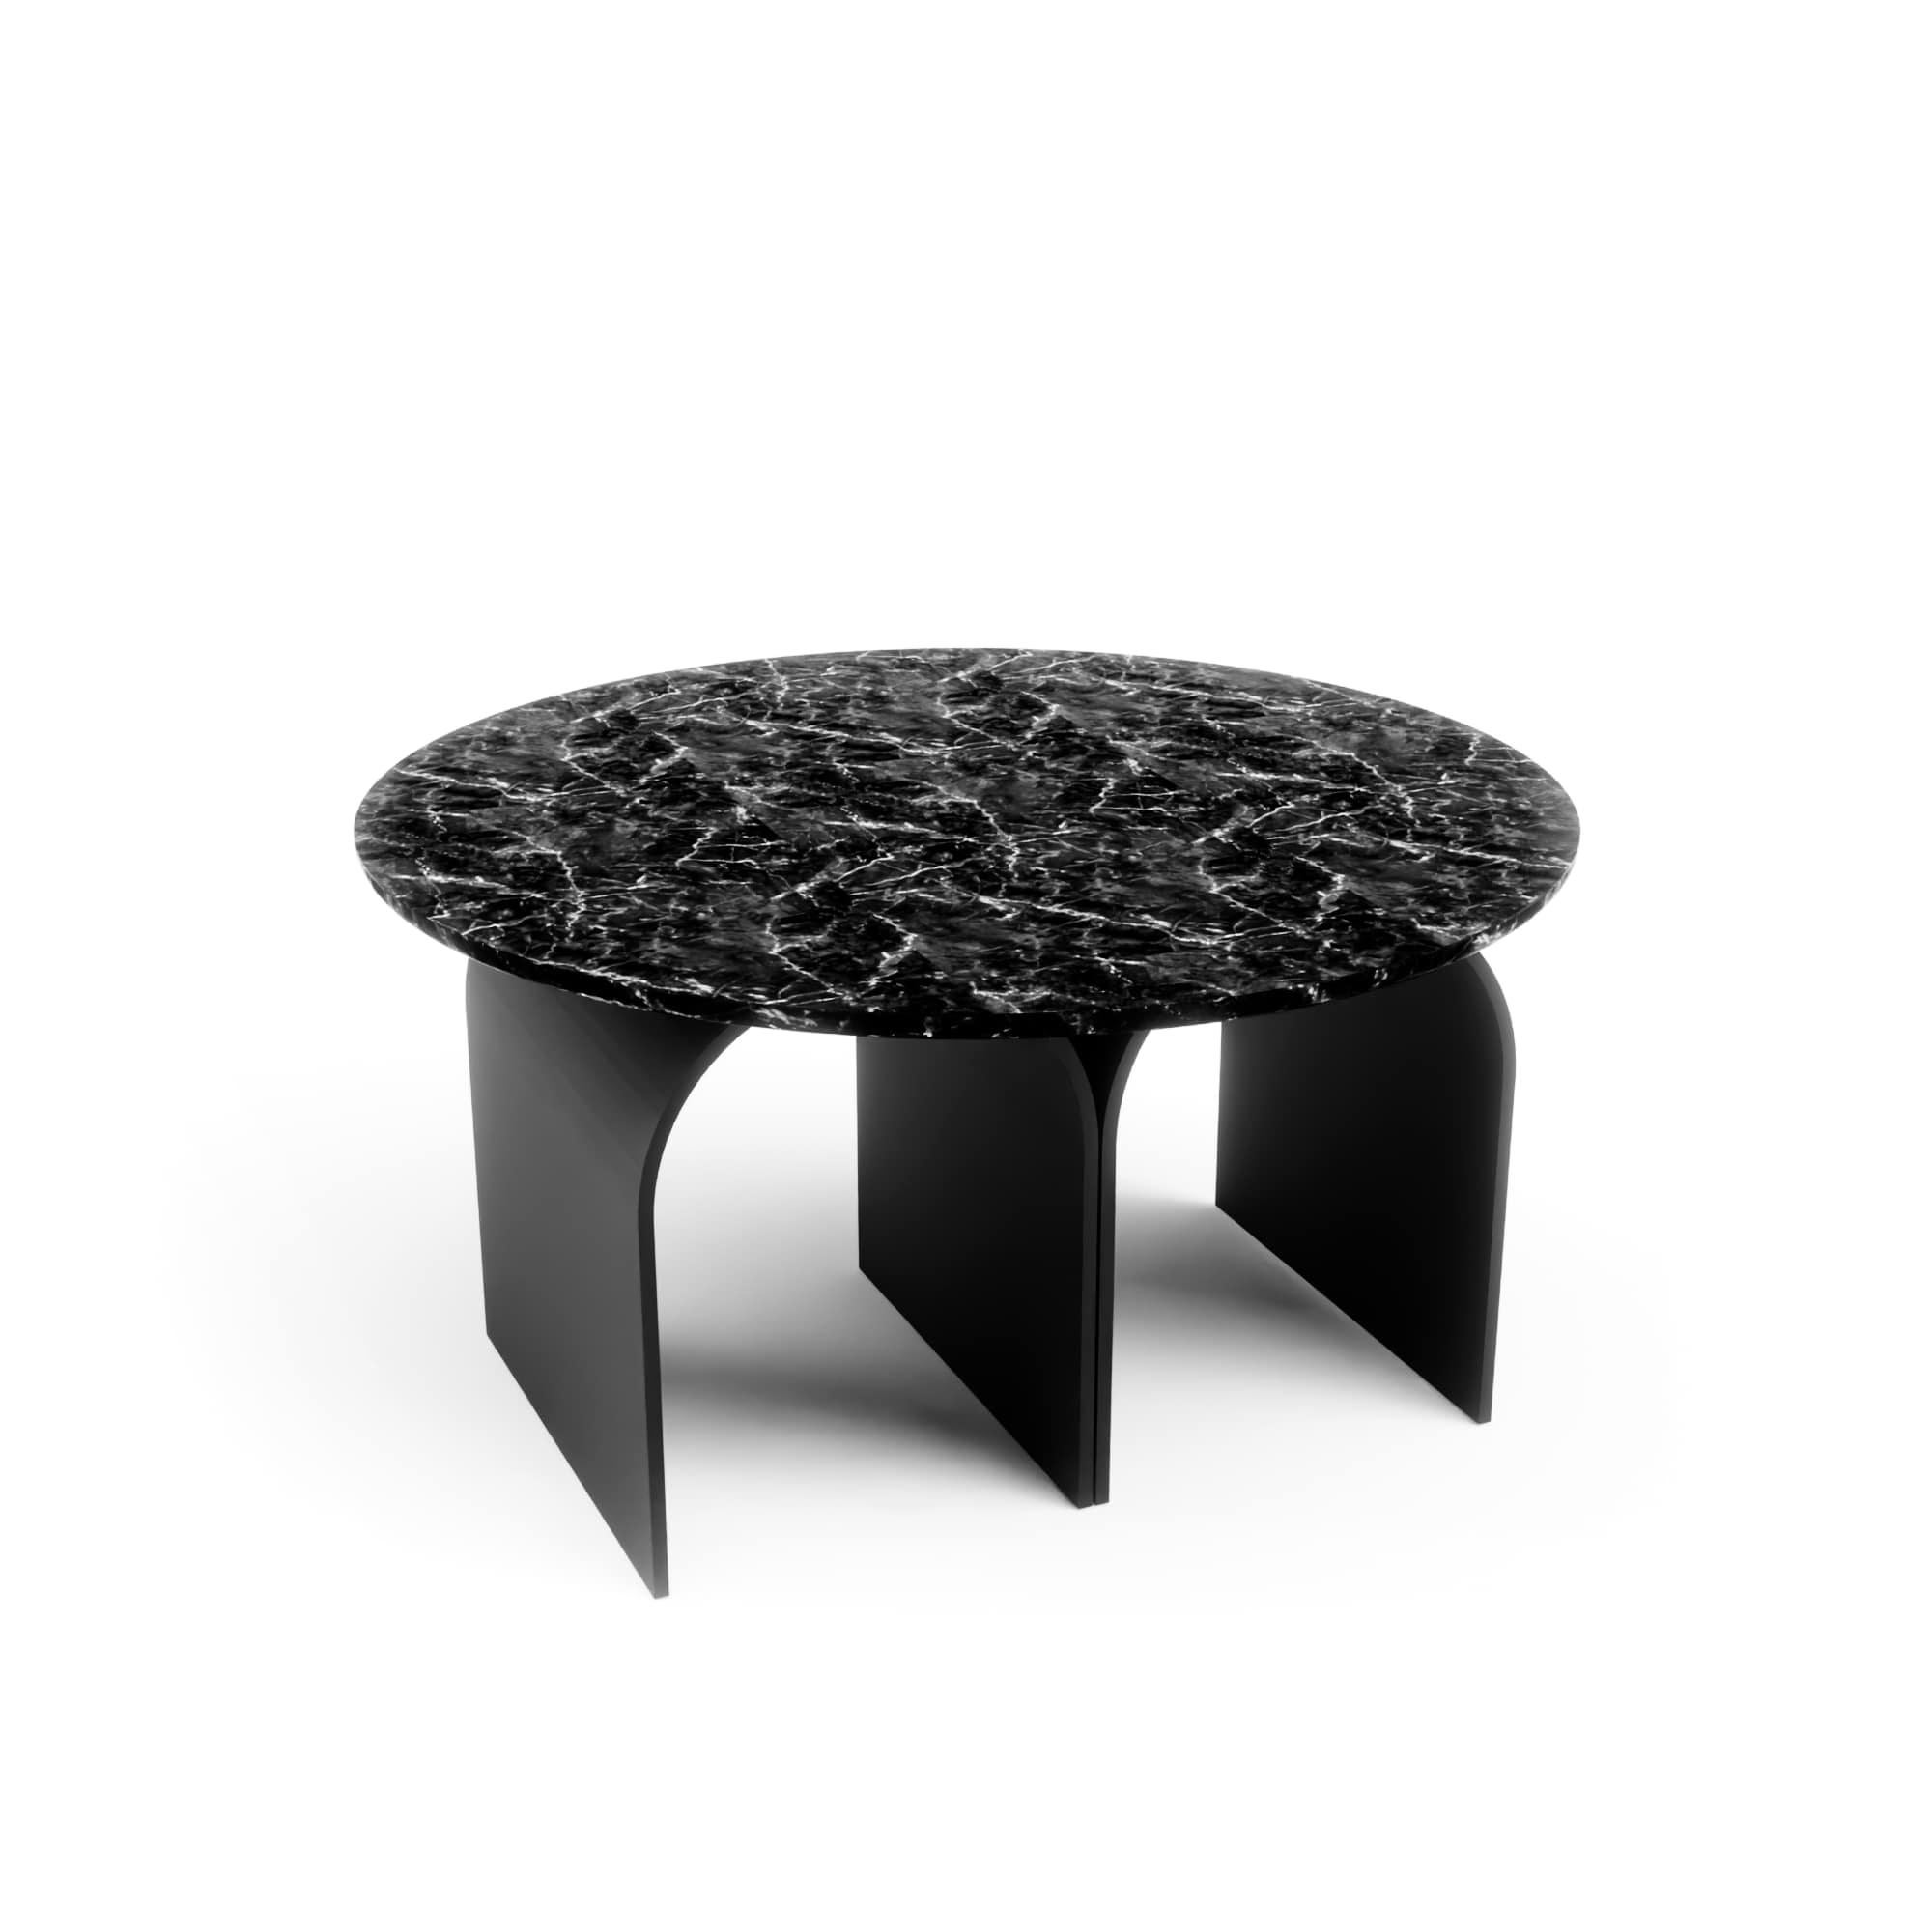 The Arcade coffee table - Rounded Marble version has been created by Kasadamo in collaboration with Pierre Tassin, french designer. This table reflects a mix between old and futuristic architecture. Its identity is found in the arched legs,